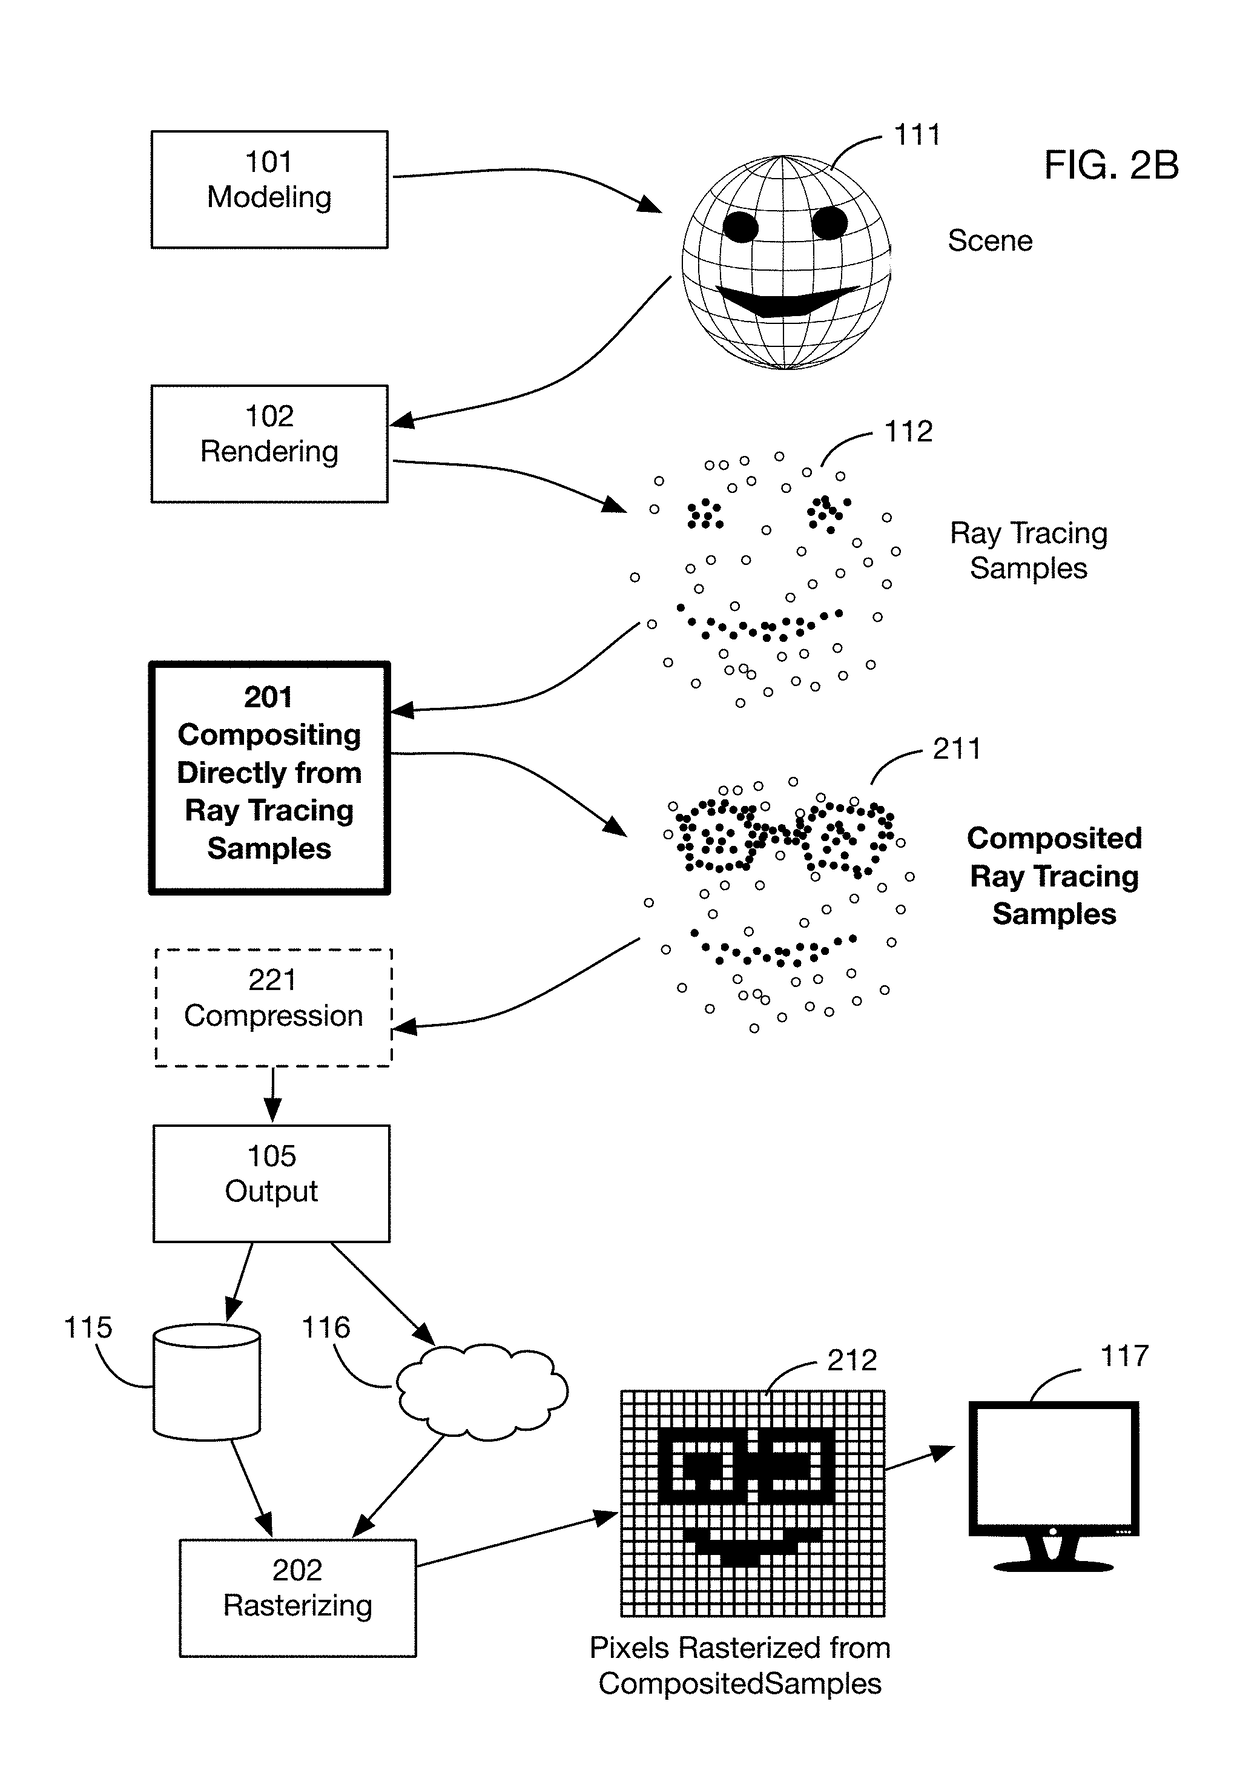 Non-rasterized image streaming system that uses ray tracing samples